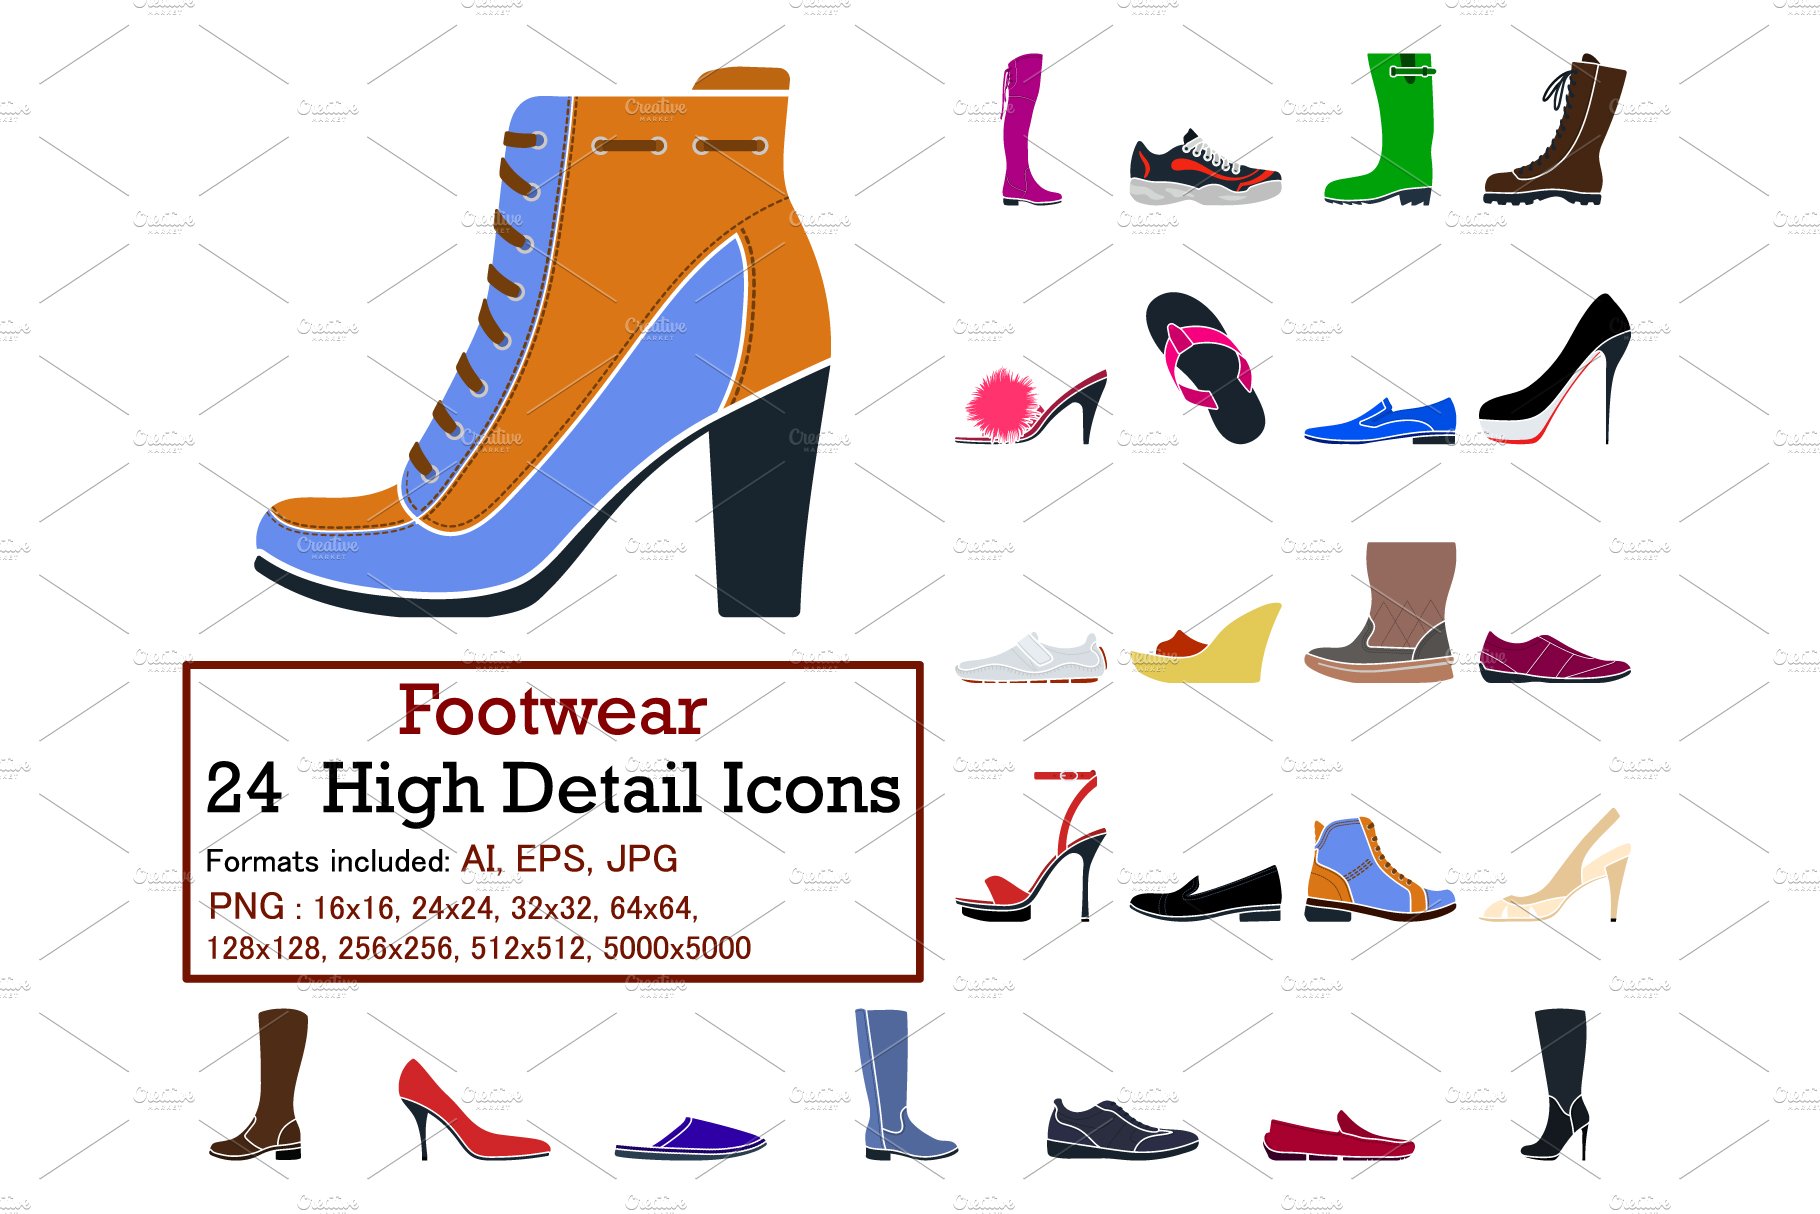 Footwear Icon Set cover image.